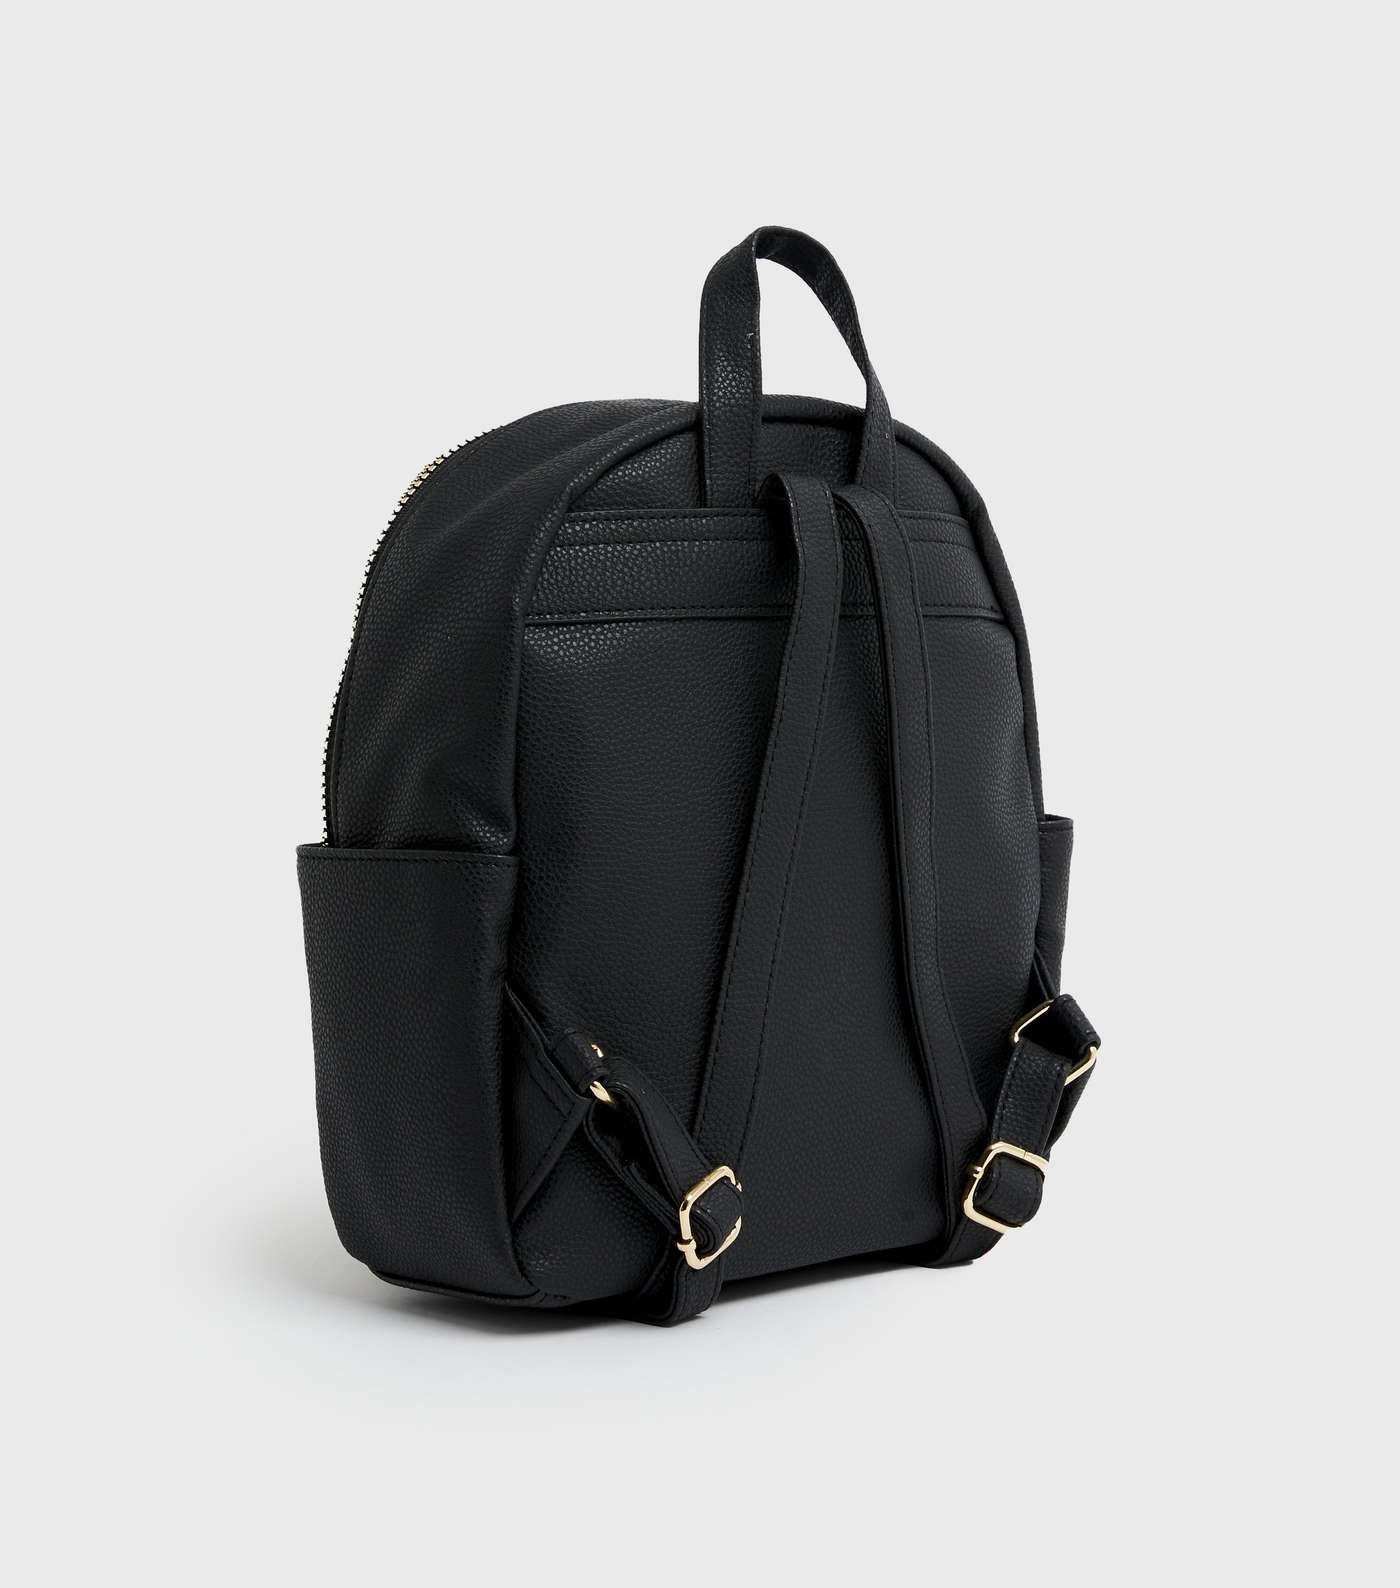 Black Leather-Look Zip Front Mini Backpack Image 3